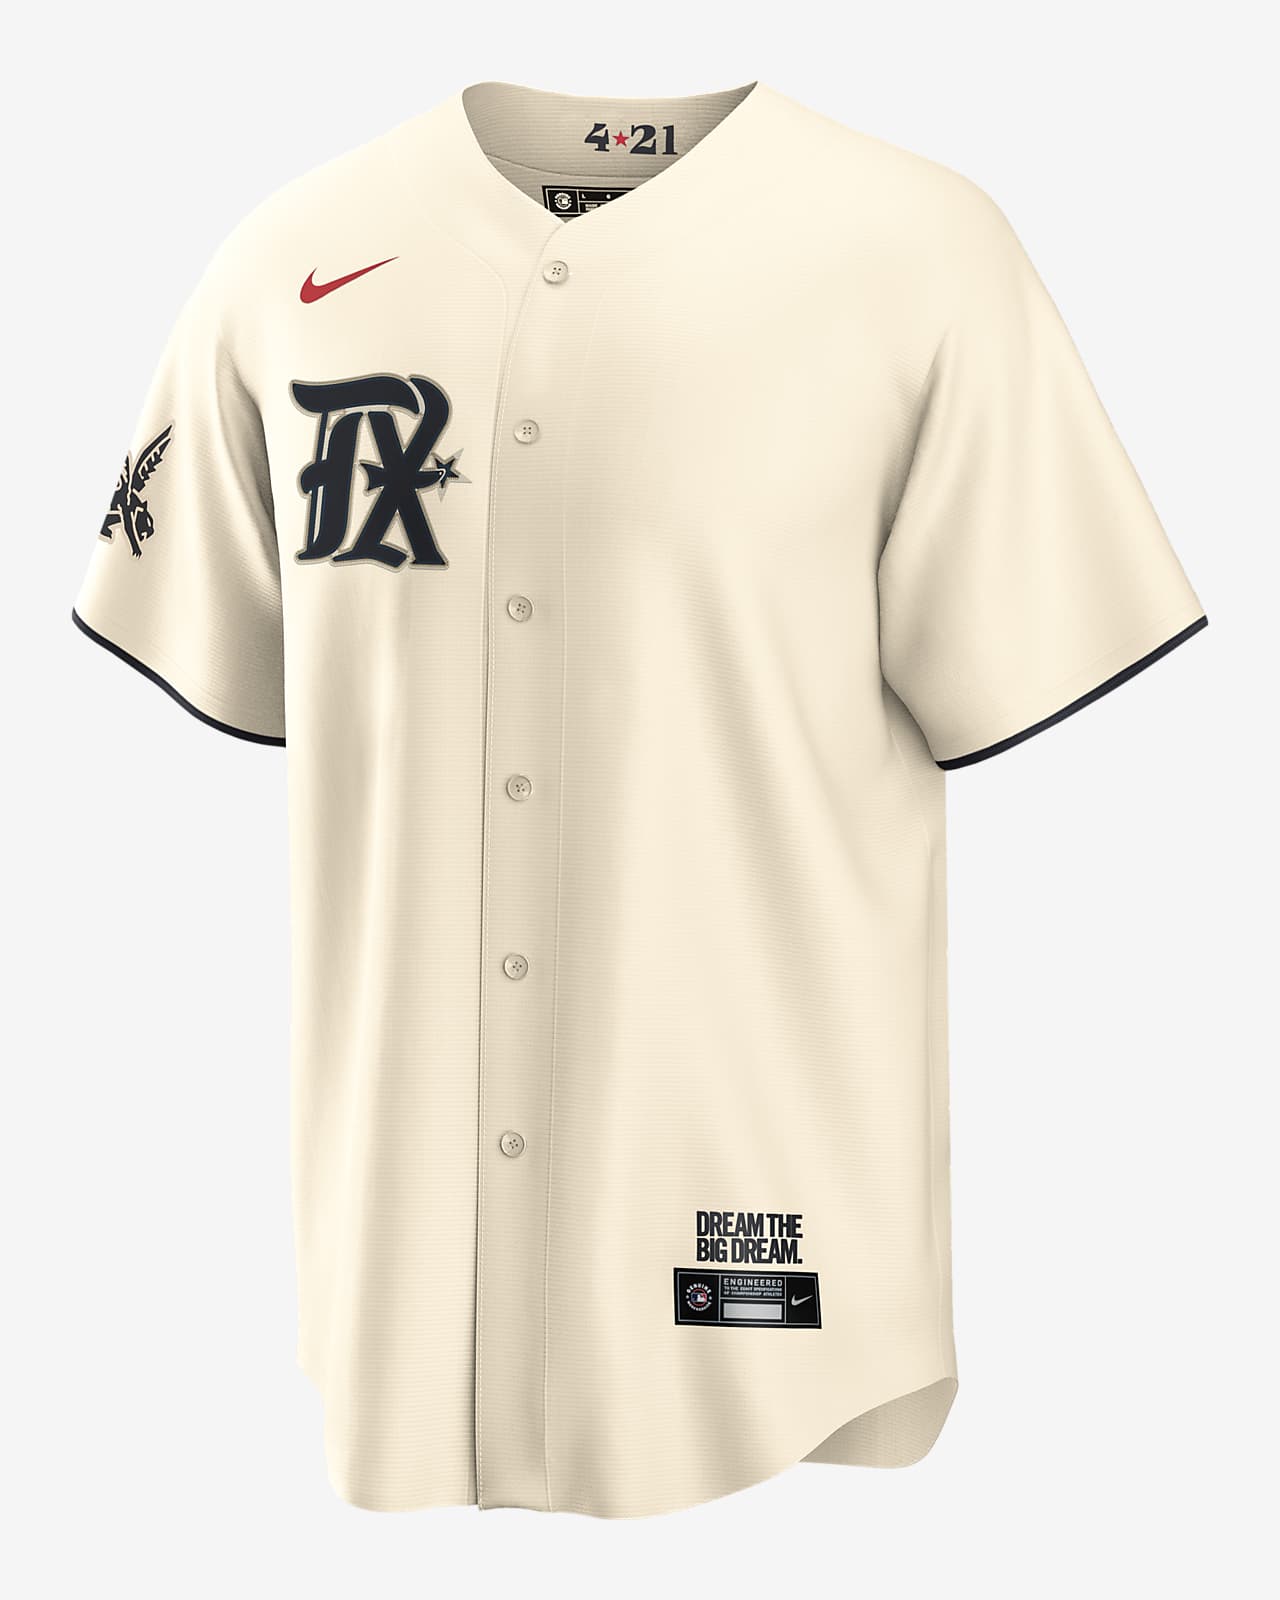 Nike x MLB City Connect Jersey Release Information